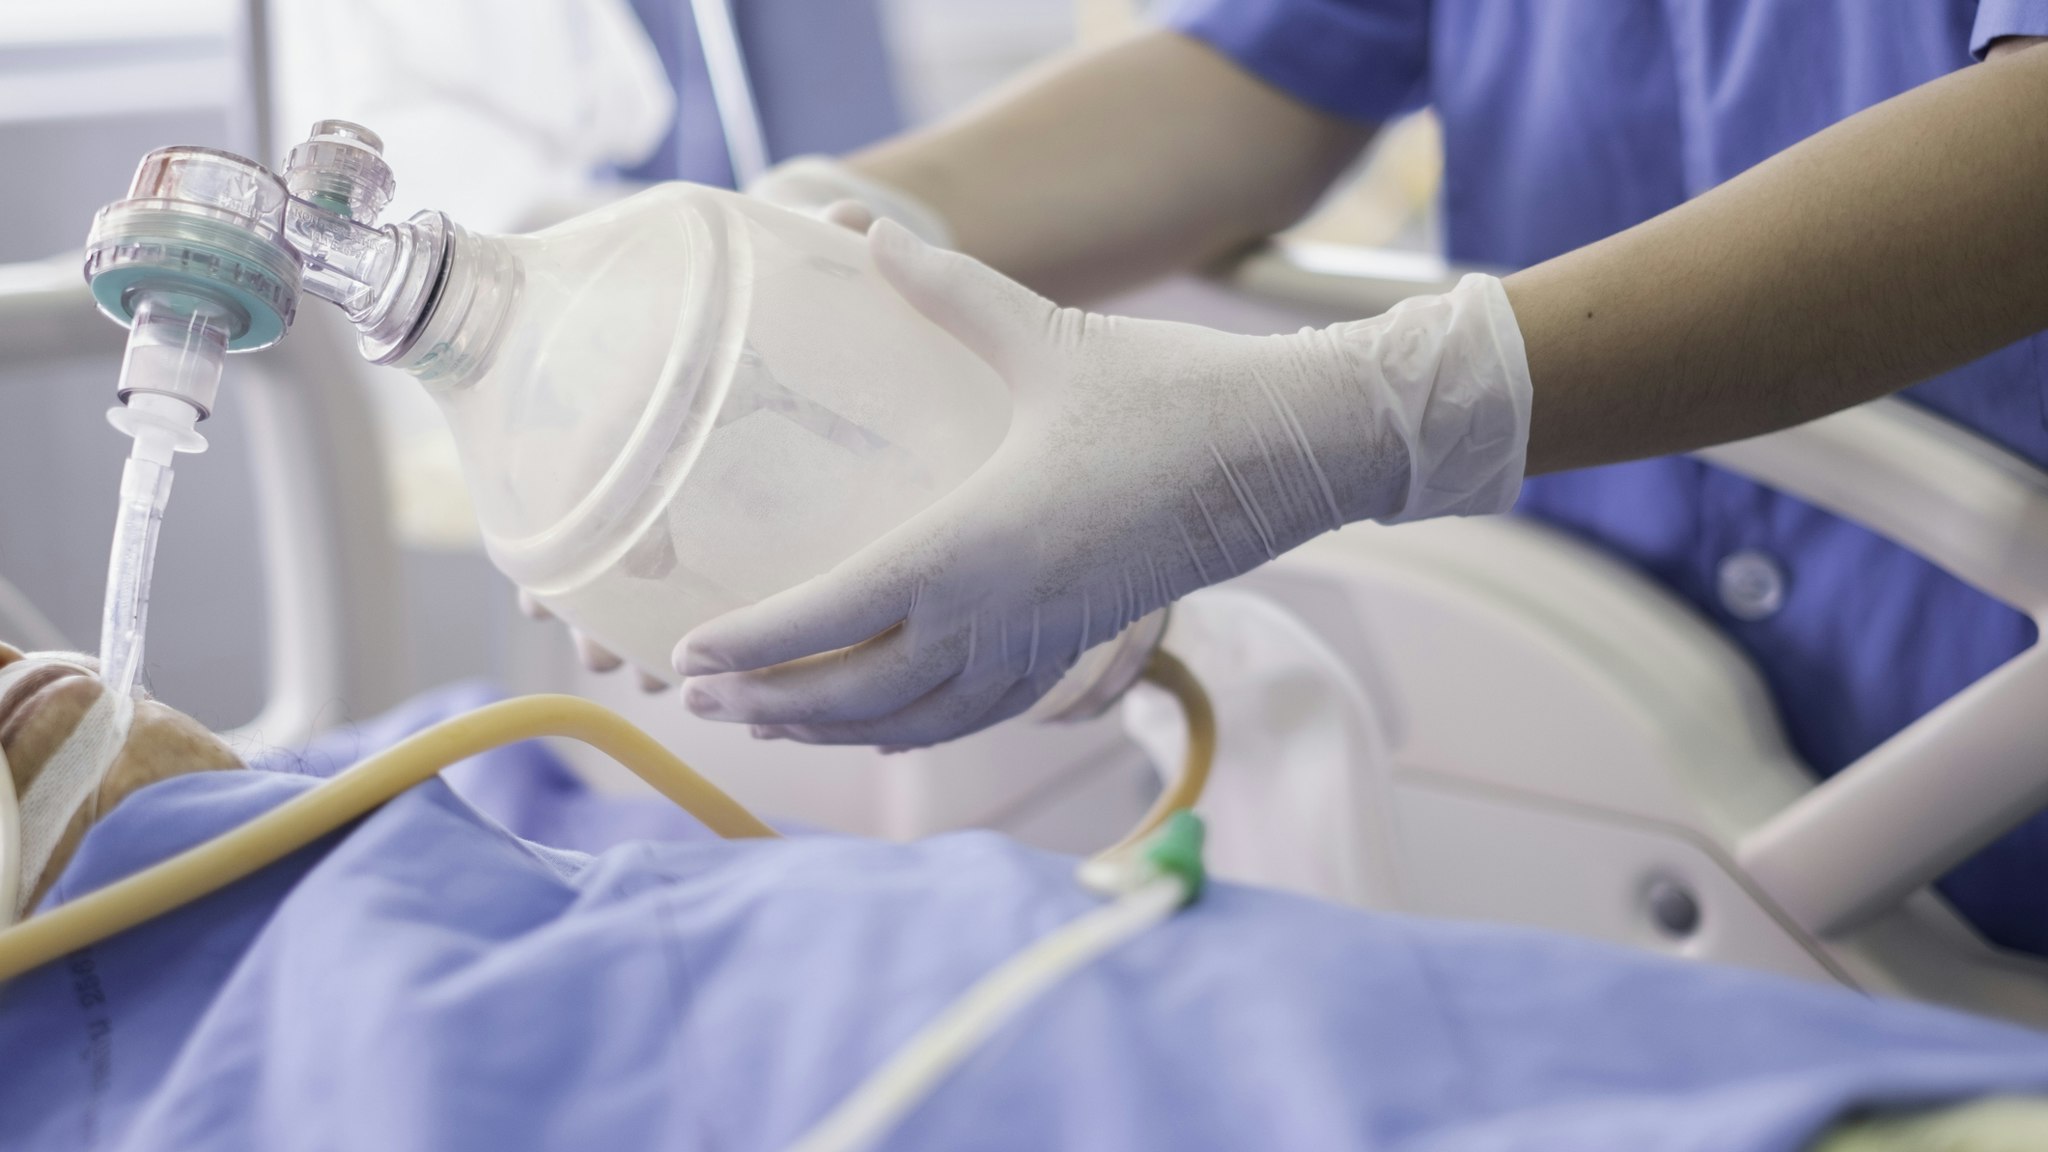 Doctor holding oxygen ambu bag over patient given oxygen to patient by intubation tube in ICU/Emergency room - stock photo